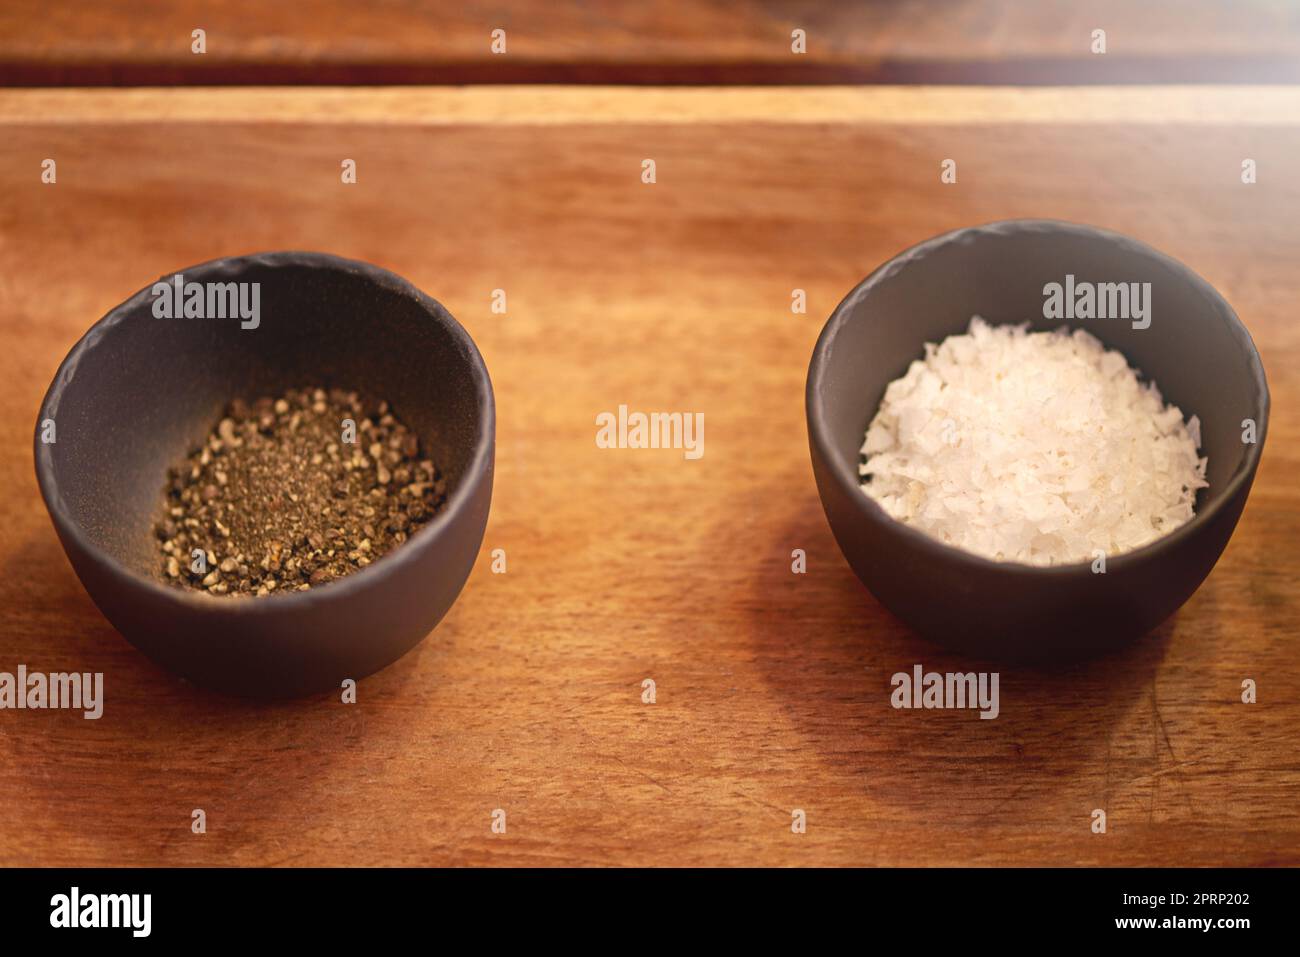 https://c8.alamy.com/comp/2PRP202/salt-and-pepperits-always-better-when-were-together-salt-and-pepper-in-bowls-on-a-tabletop-2PRP202.jpg